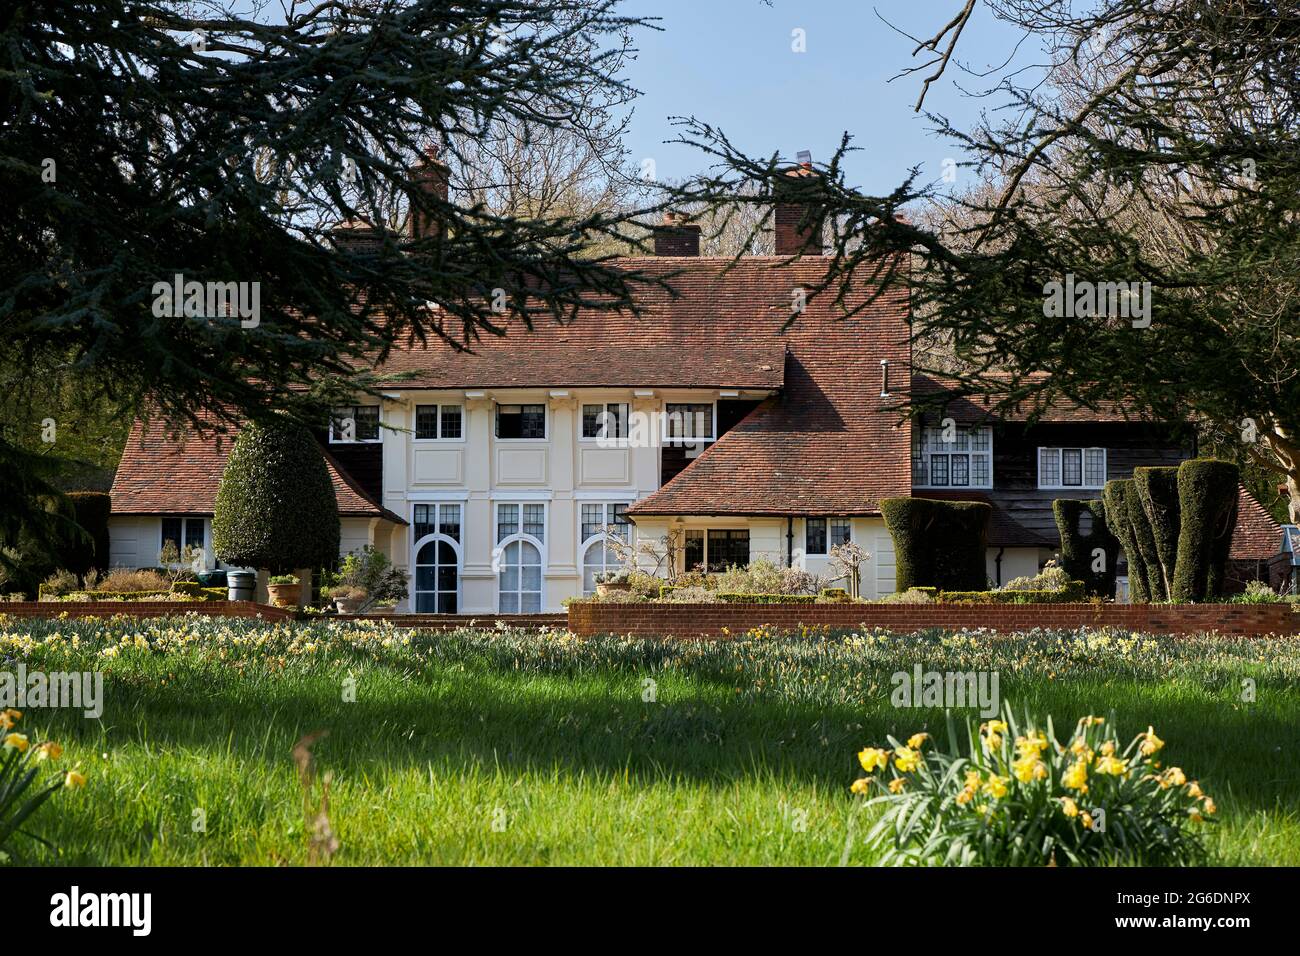 Homewood is an Arts and Crafts style country house in Knebworth, Hertfordshire, England which was designed by  Sir Edwin Lutyens between 1900–3. Stock Photo